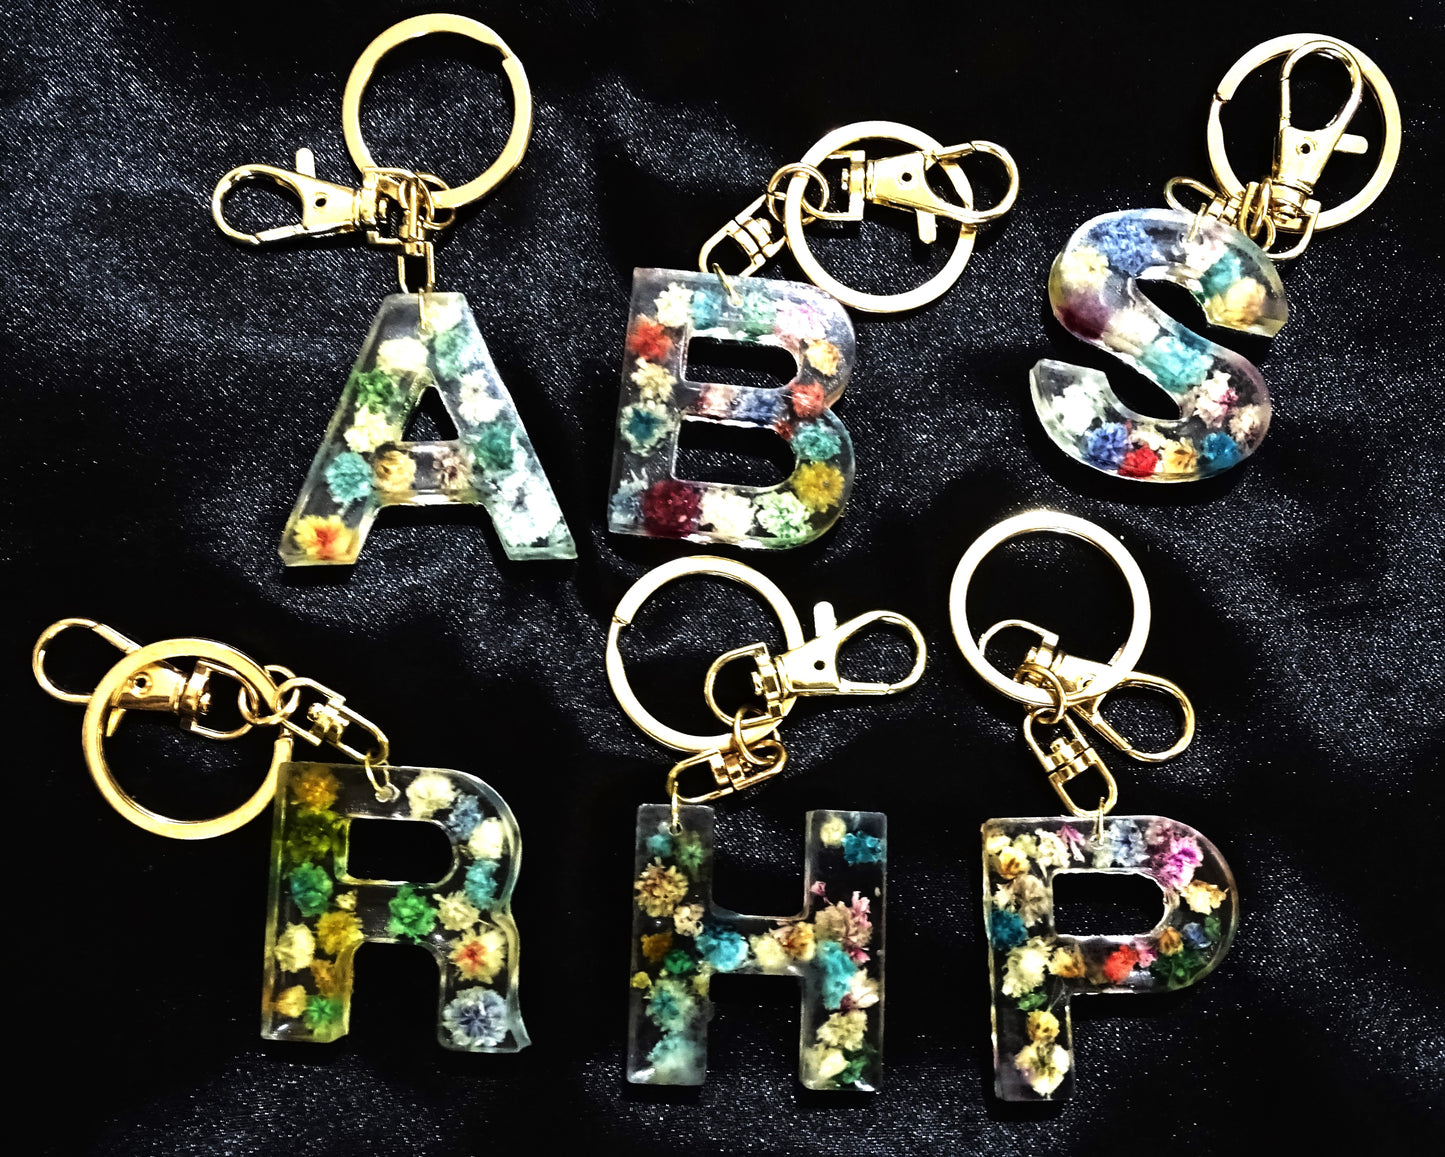 Elegance in your palm (Key Chains with Dried Flowers)